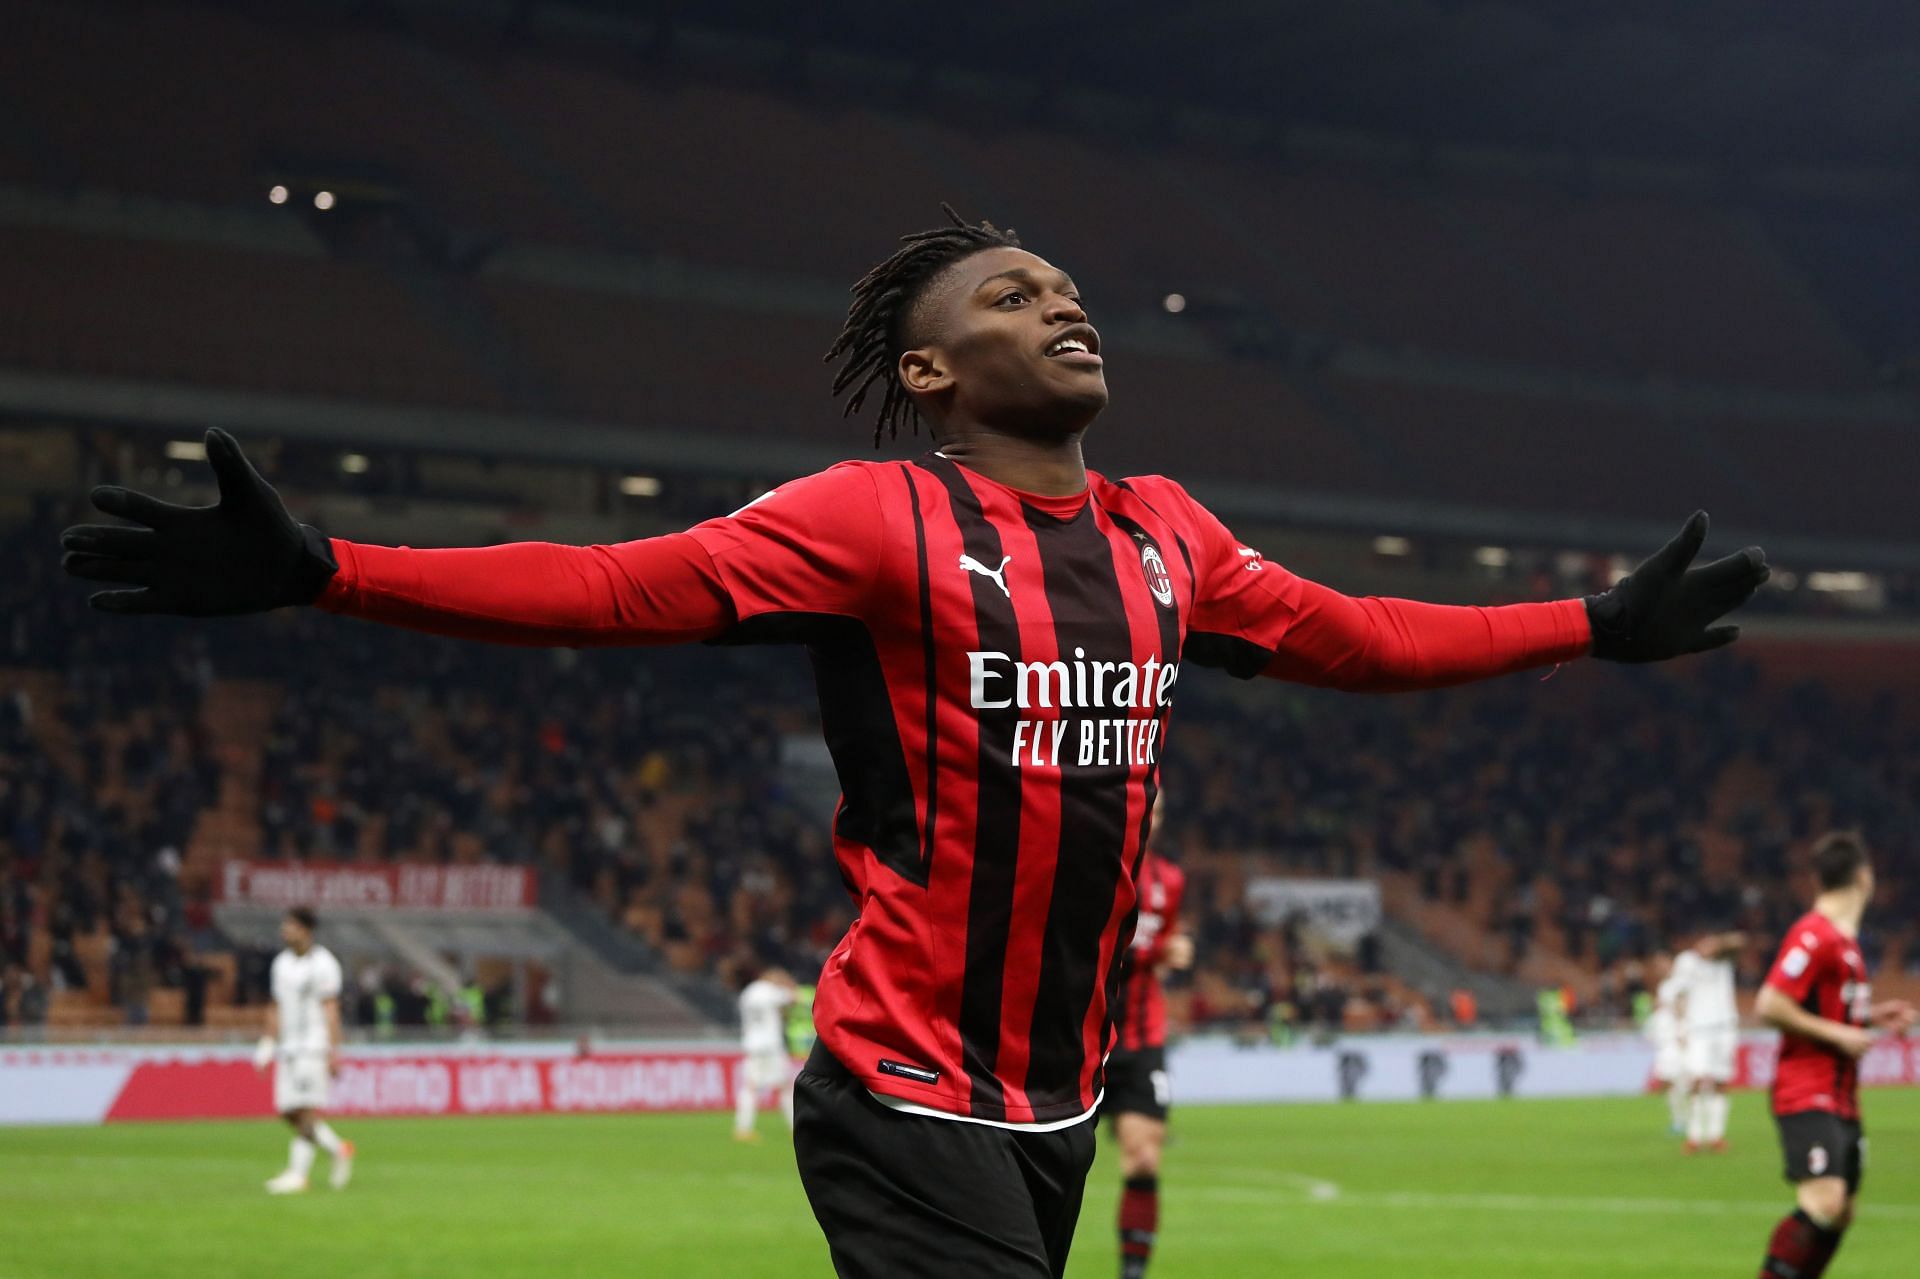 AC Milan youngster Rafael Leao is touted to become a big player with time